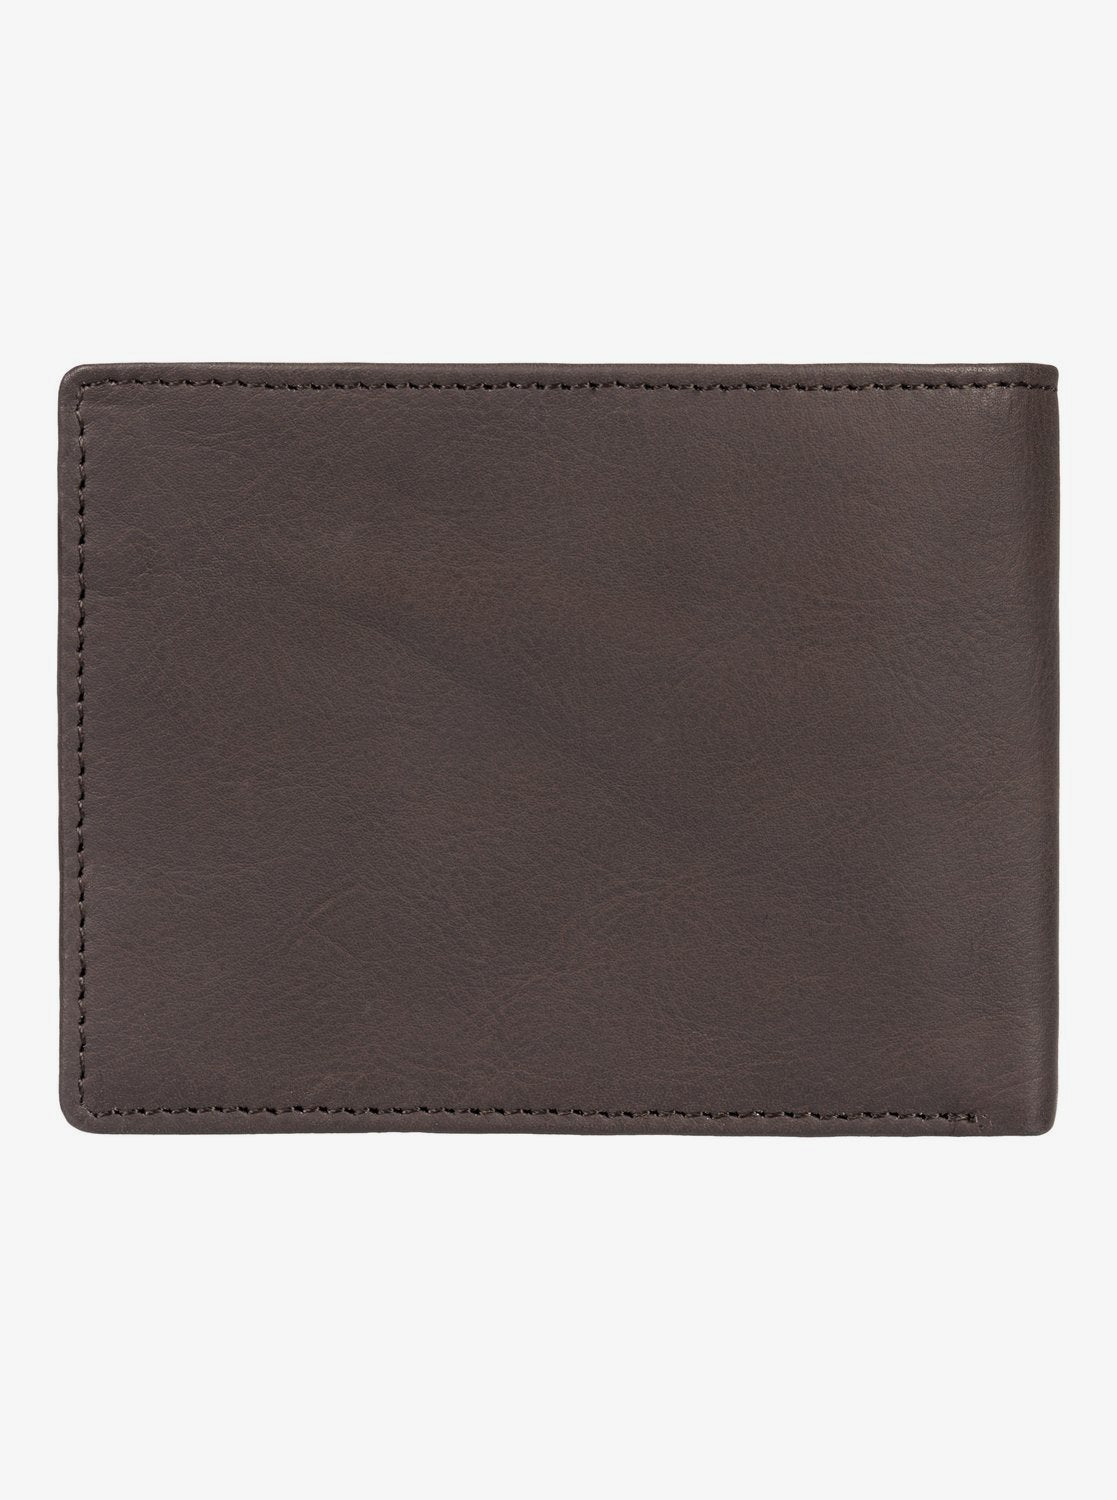 Quiksilver Gutherie Leather Bi Fold Wallet Brown